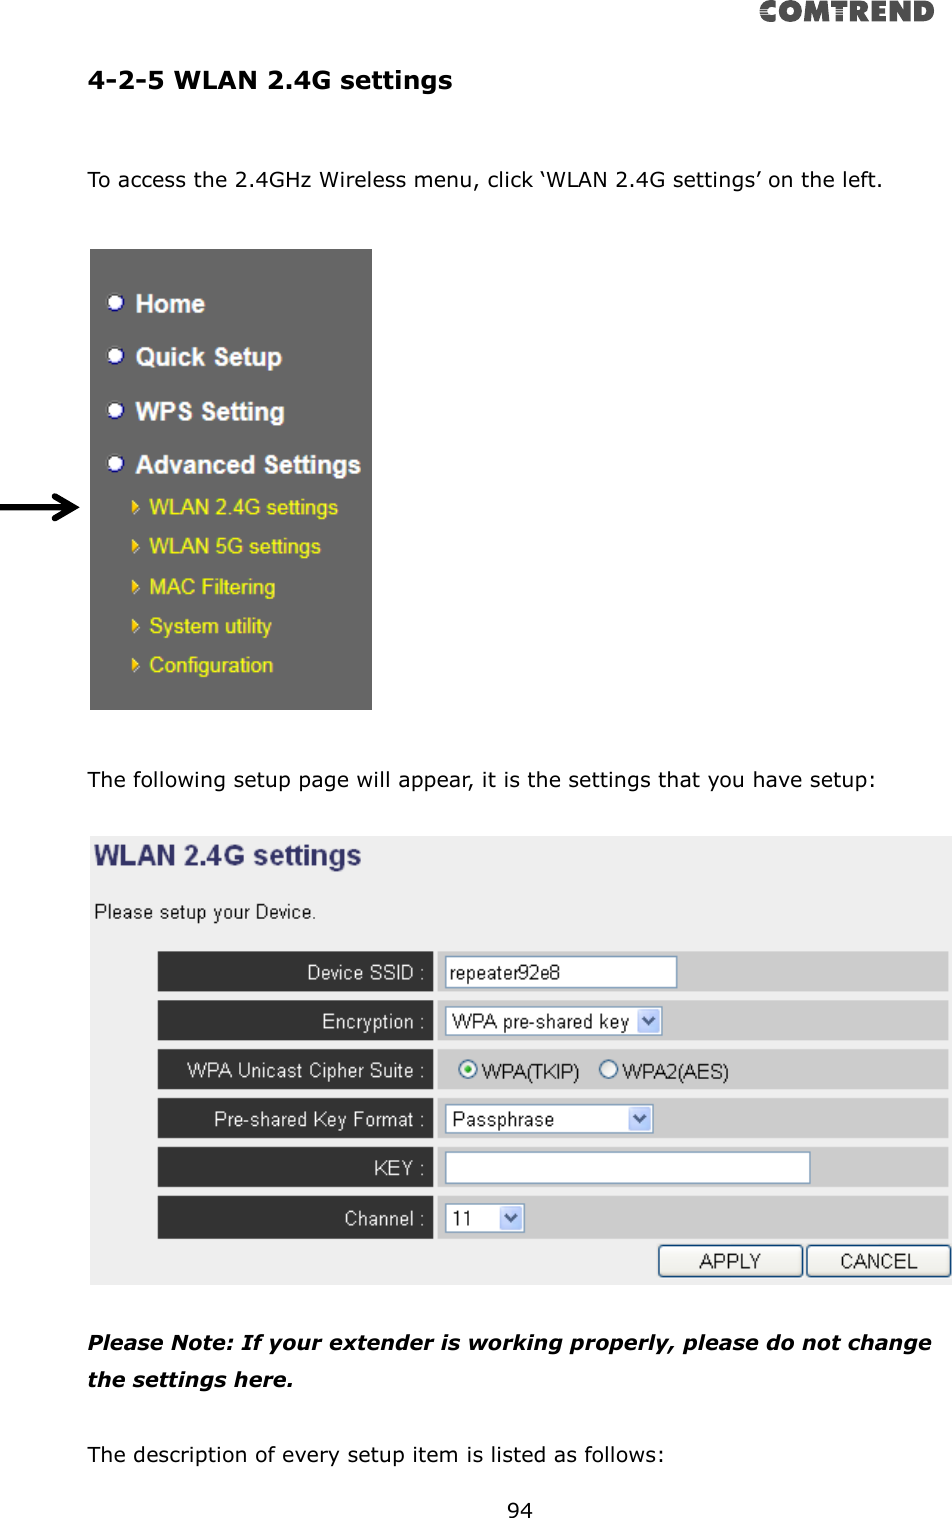       94  4-2-5 WLAN 2.4G settings  To access the 2.4GHz Wireless menu, click ‘WLAN 2.4G settings’ on the left.    The following setup page will appear, it is the settings that you have setup:    Please Note: If your extender is working properly, please do not change the settings here.  The description of every setup item is listed as follows: 